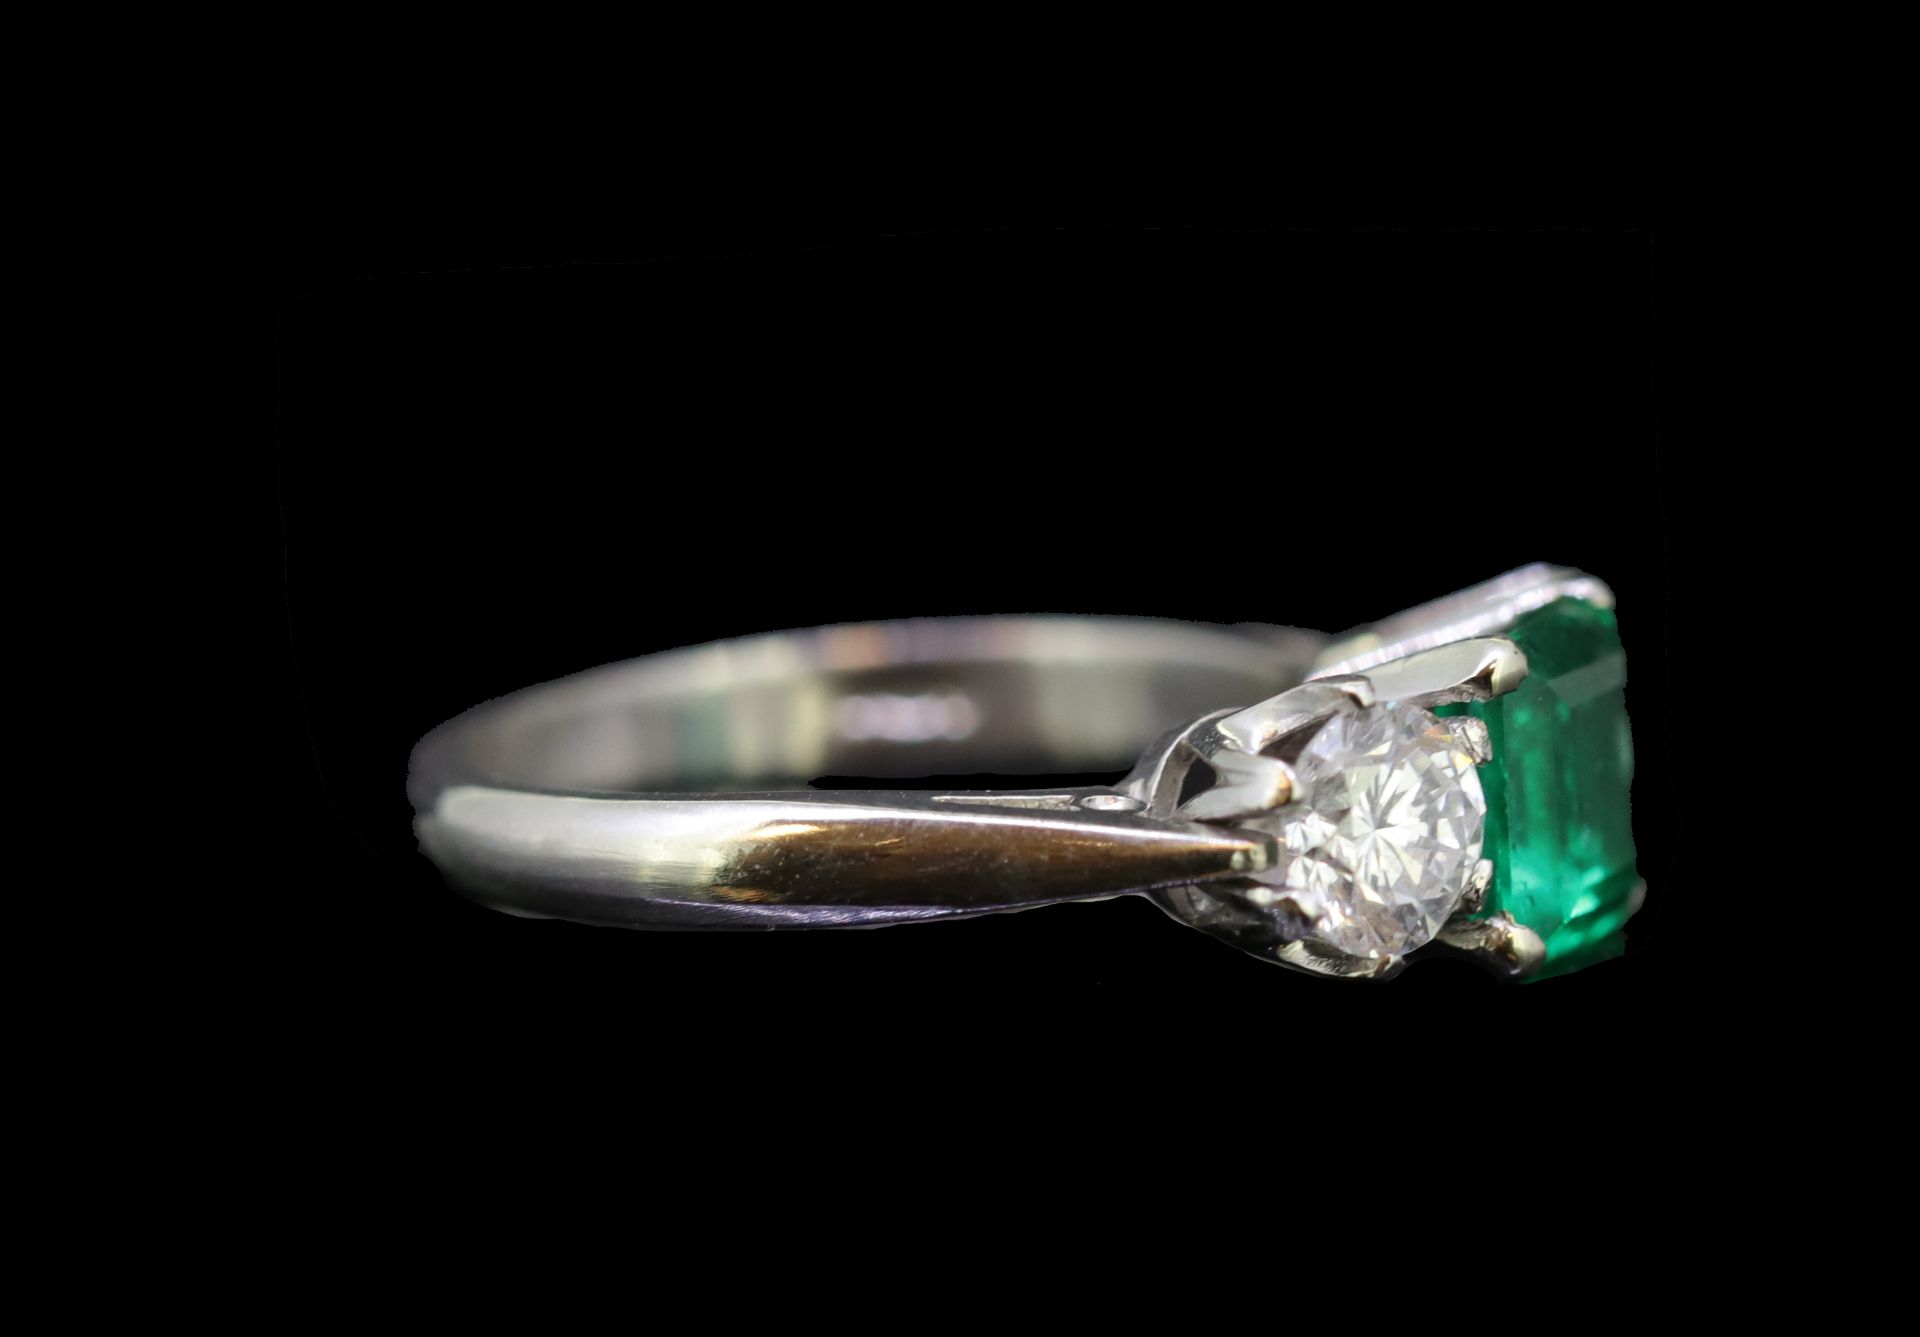 1.33 ct. COLOMBIAN EMERALD AND DIAMOND RING - Image 2 of 2